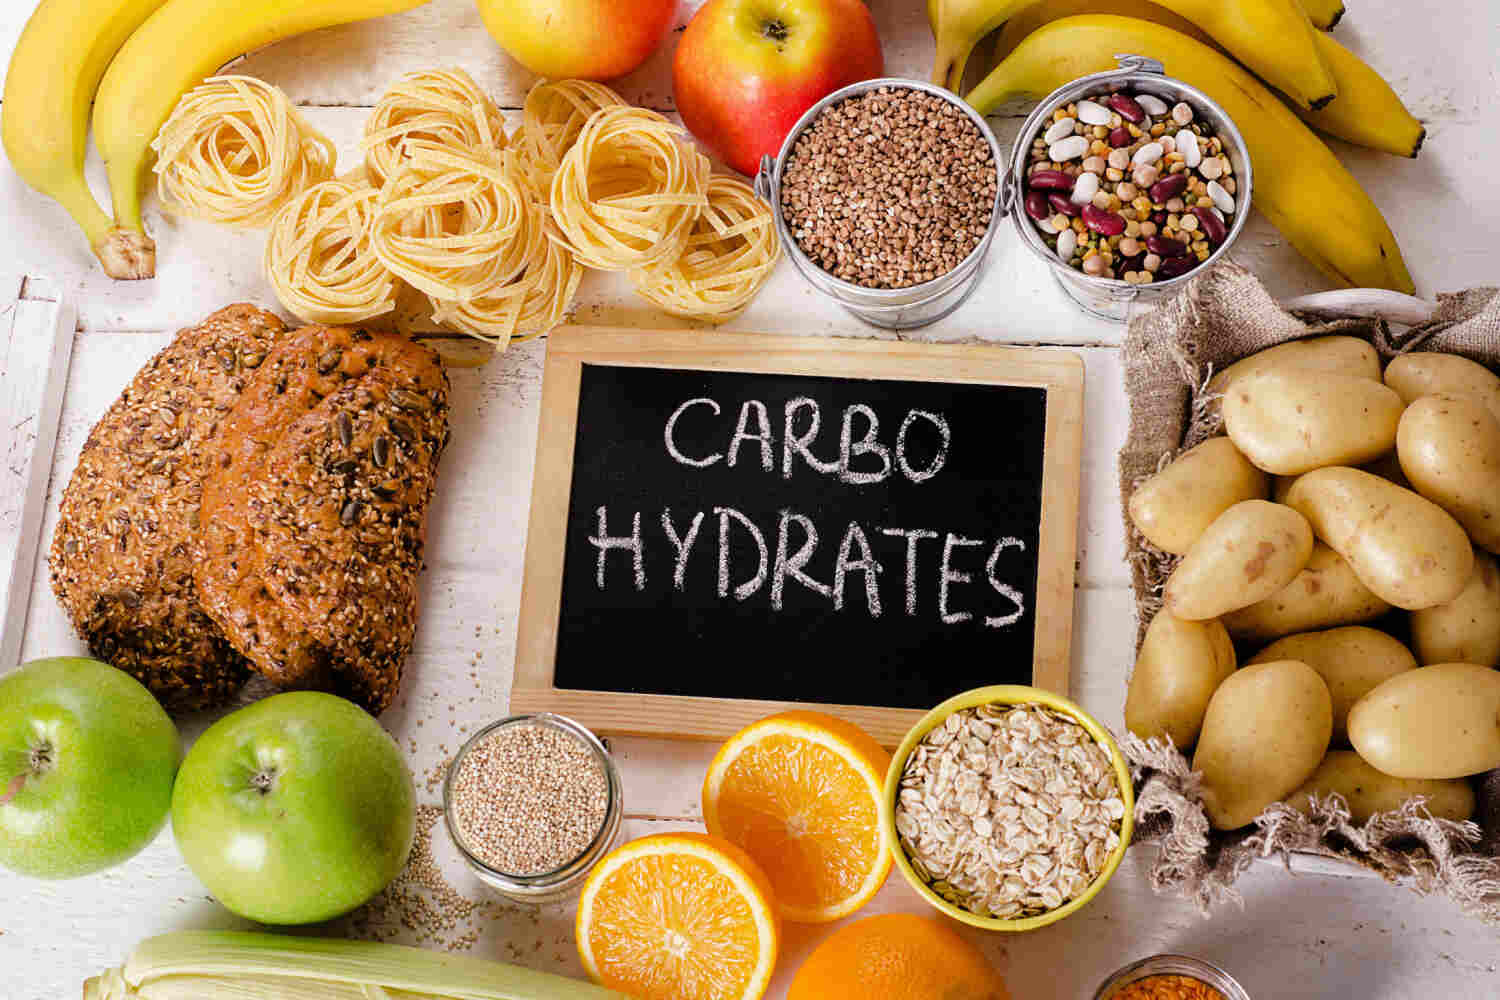 Carbohydrates provide energy to toddlers